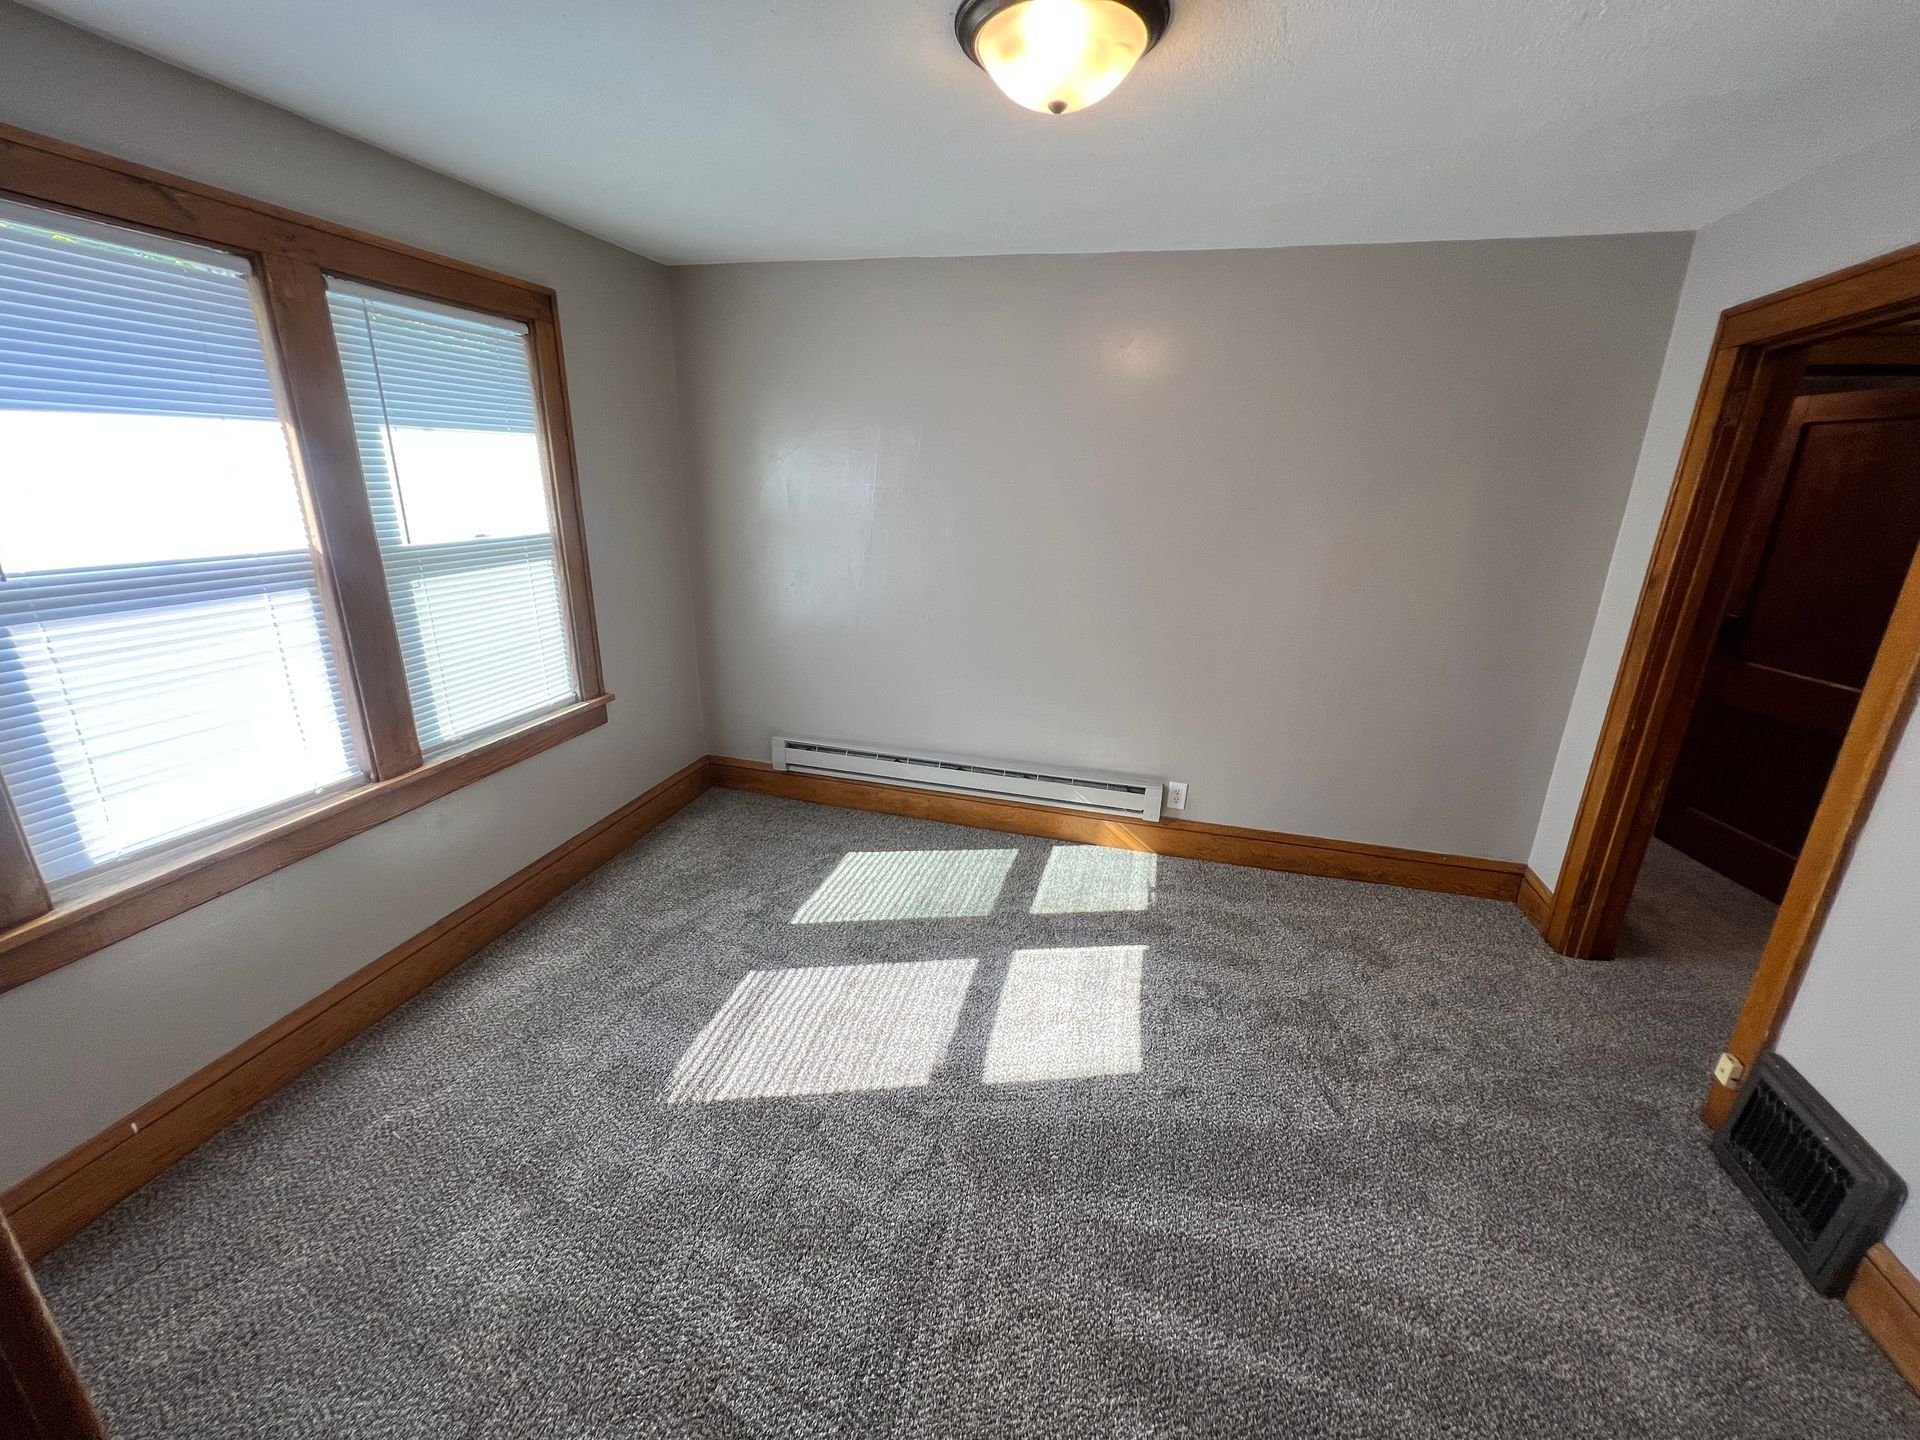 An empty room with a lot of windows and a carpeted floor.